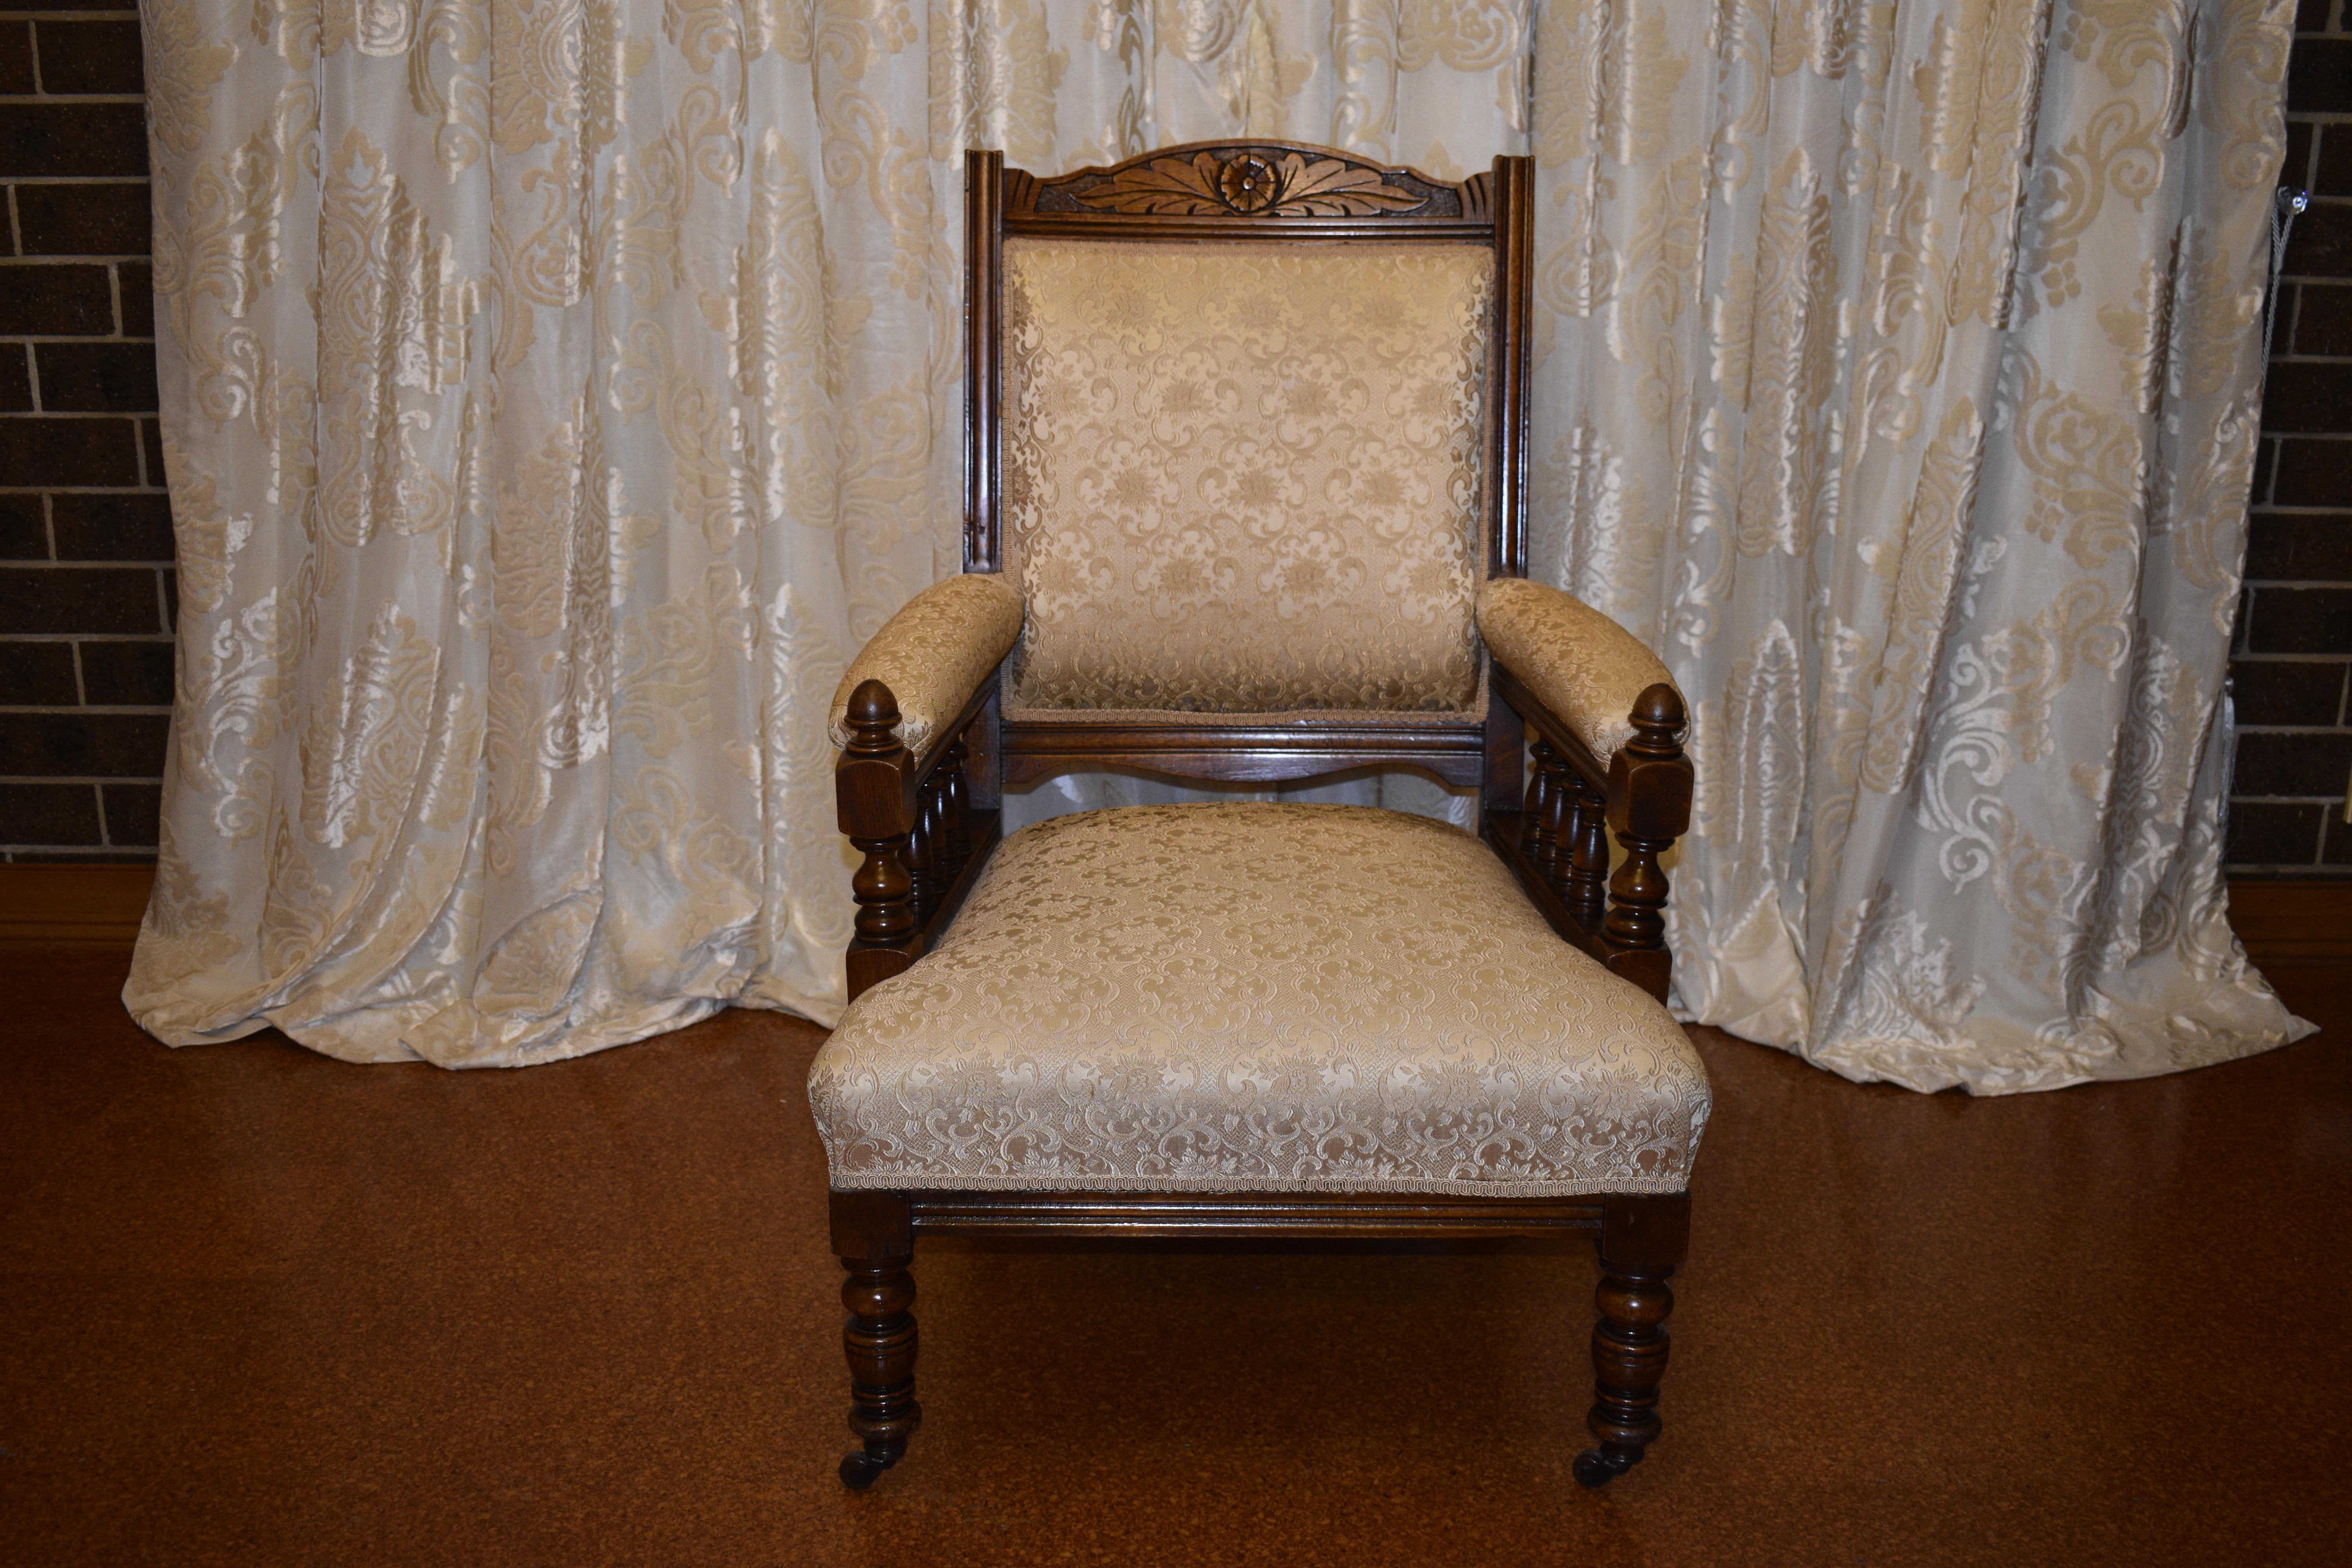 Edwardian grandfather armchair with front castors, carved detail throughout, comes with cushion and arm rest protectors.

Circa: 1900

Country of Origin: England

Measurements: 96cm high, 65cm width, 65cm deep

Antiques Yeah offers delivery to your